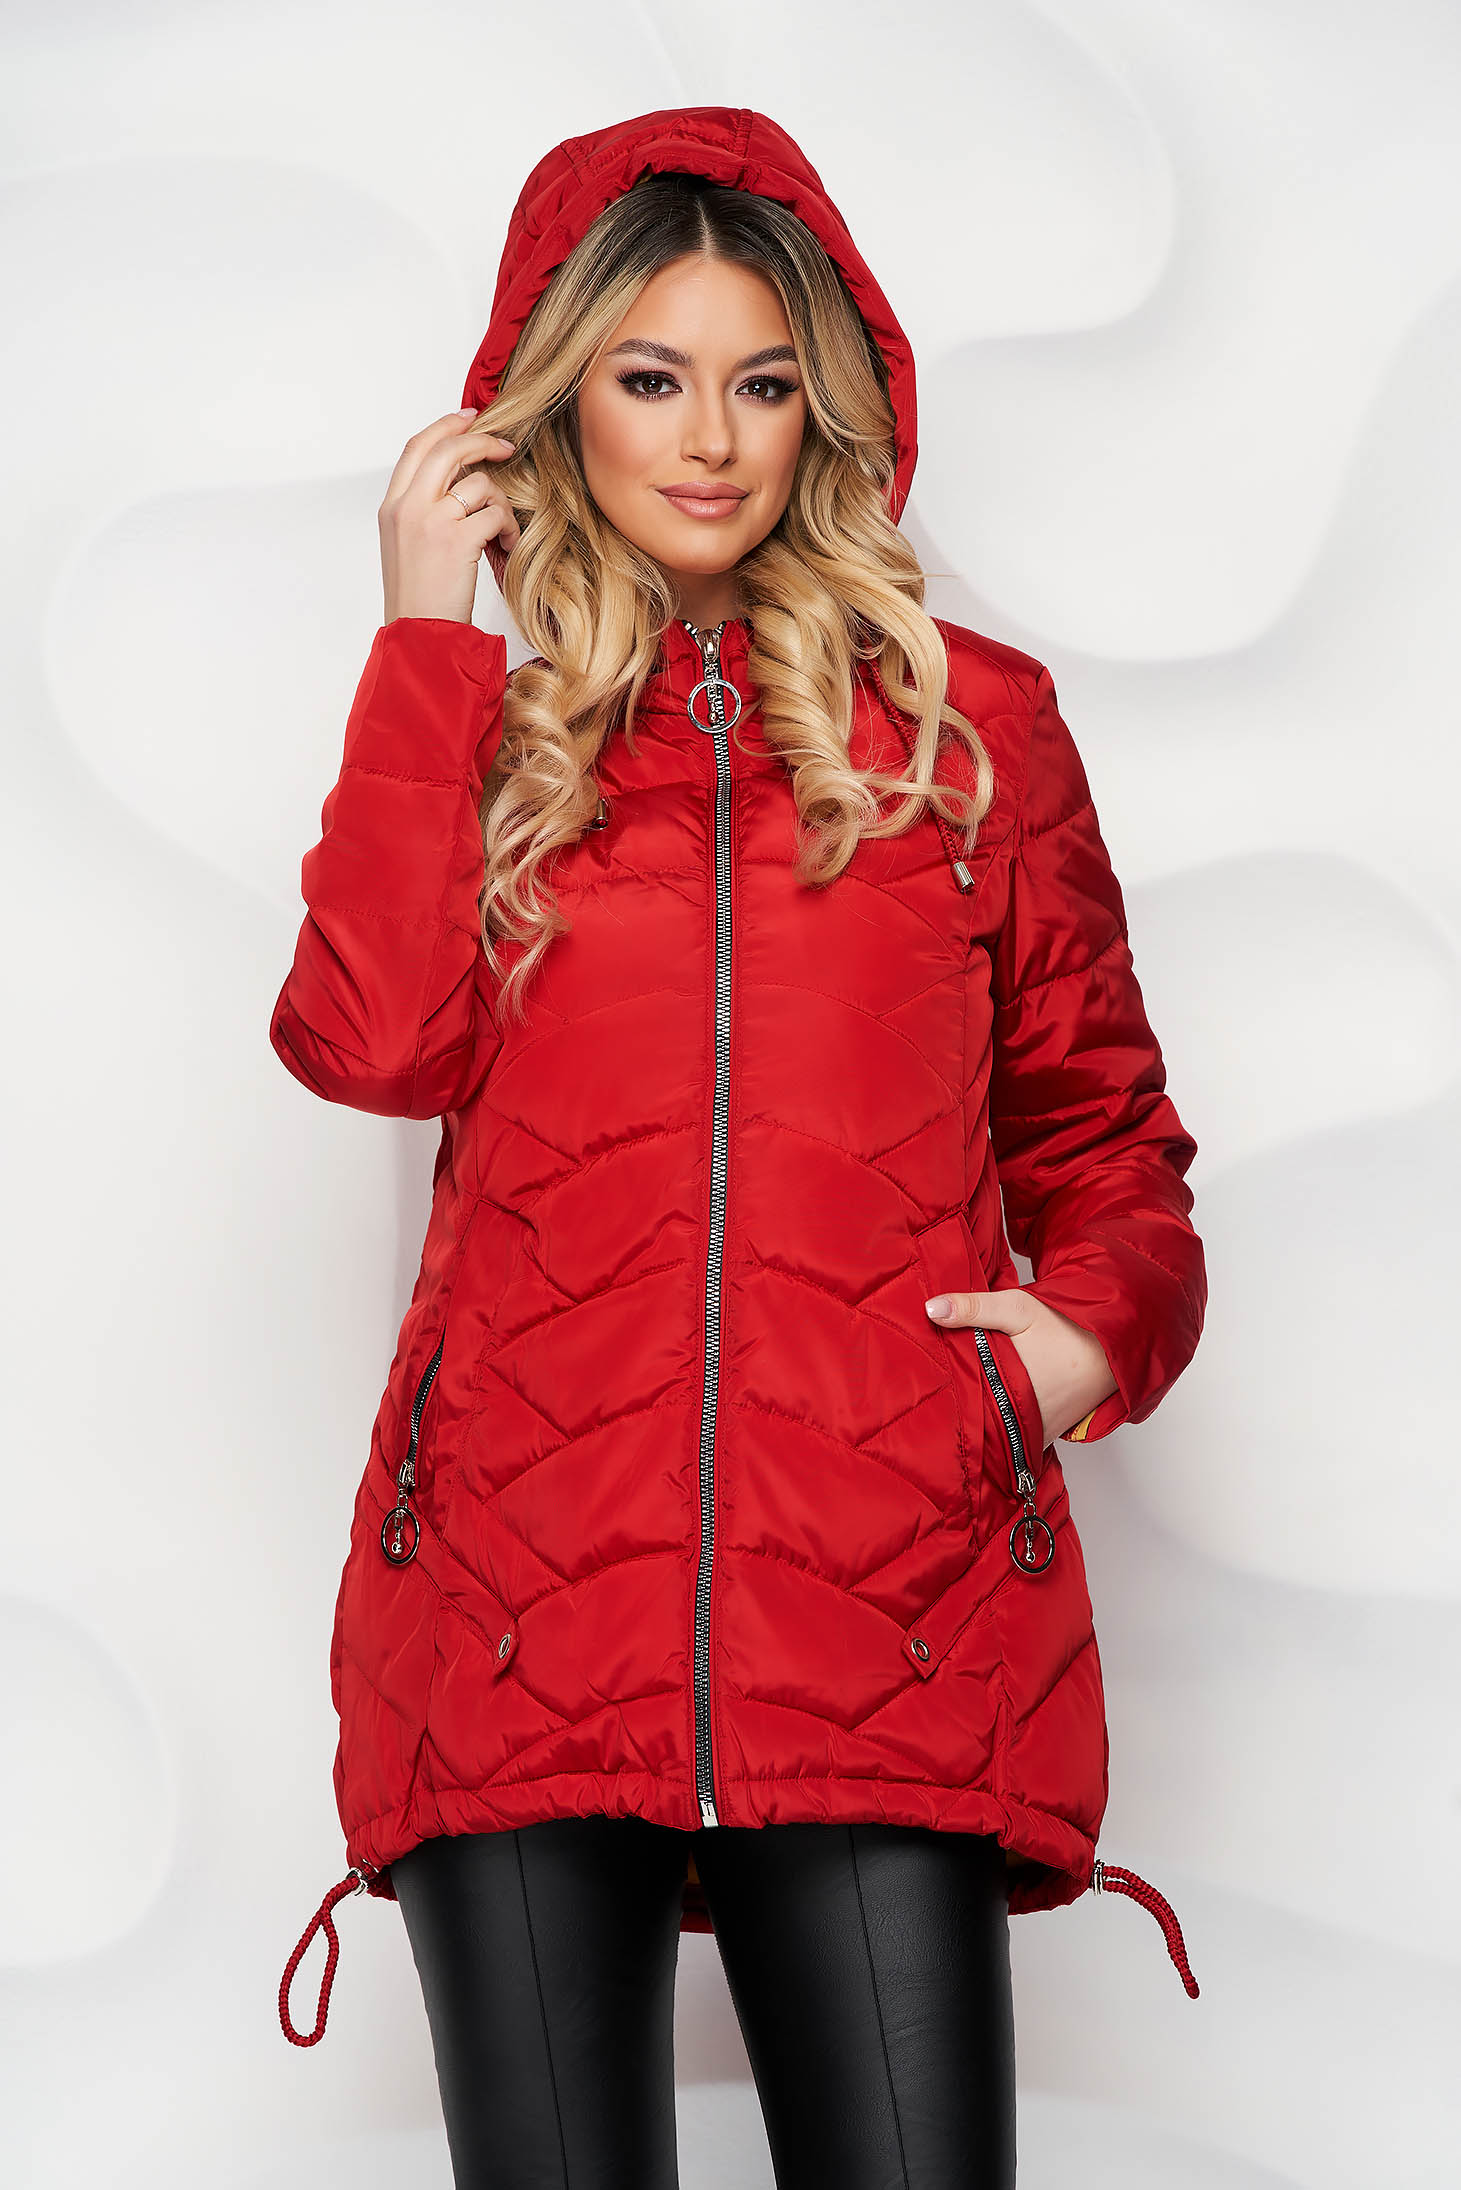 Red jacket from slicker loose fit with laced details